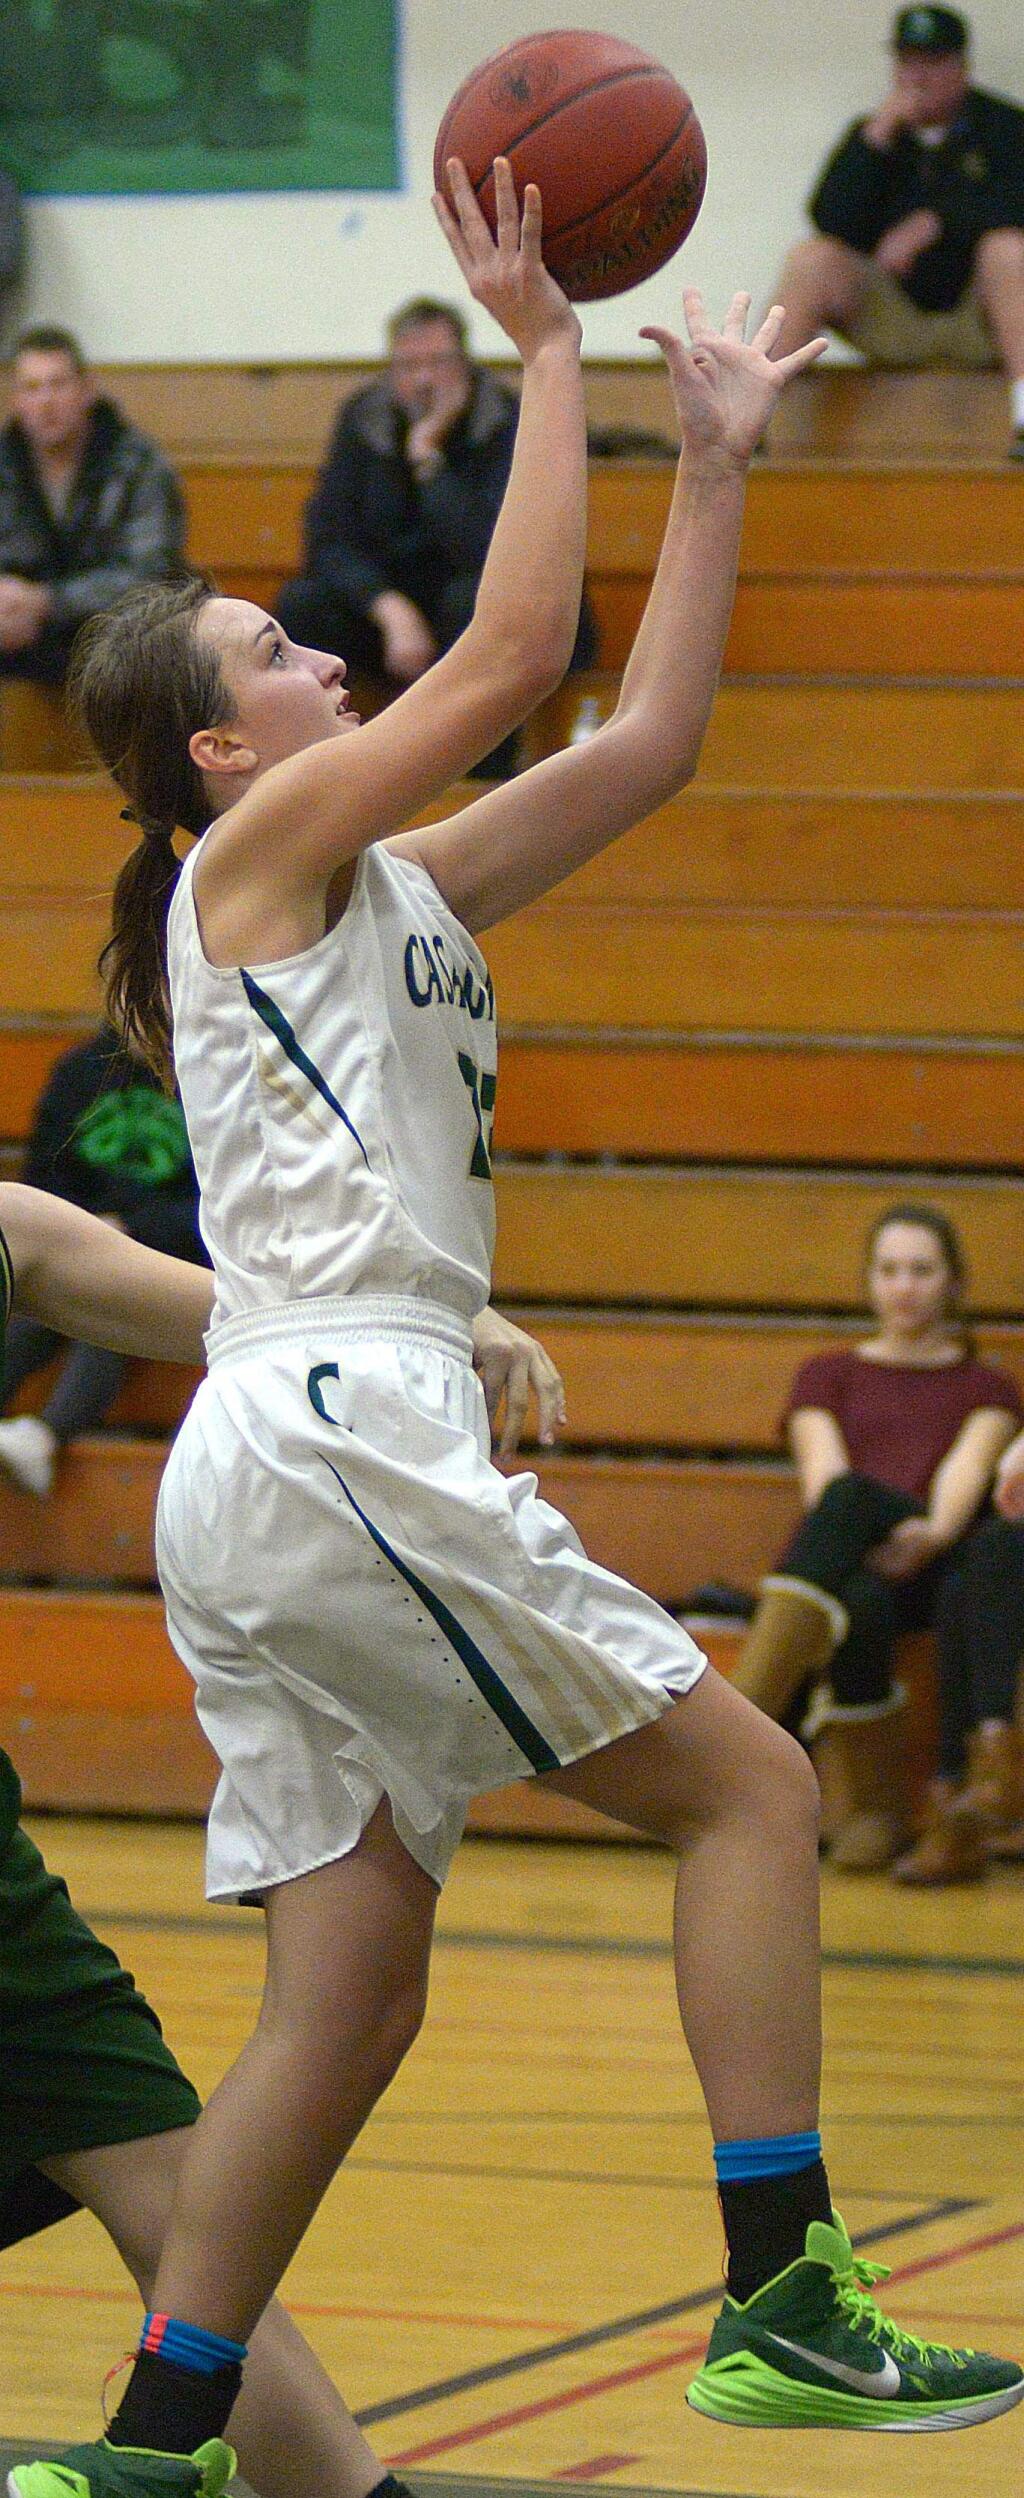 SUMNER FOWLER/FOR THE ARGUS-COURIERJoy Jovick scored 14 of Casa Grande's 22 points against Cardinal Newman.